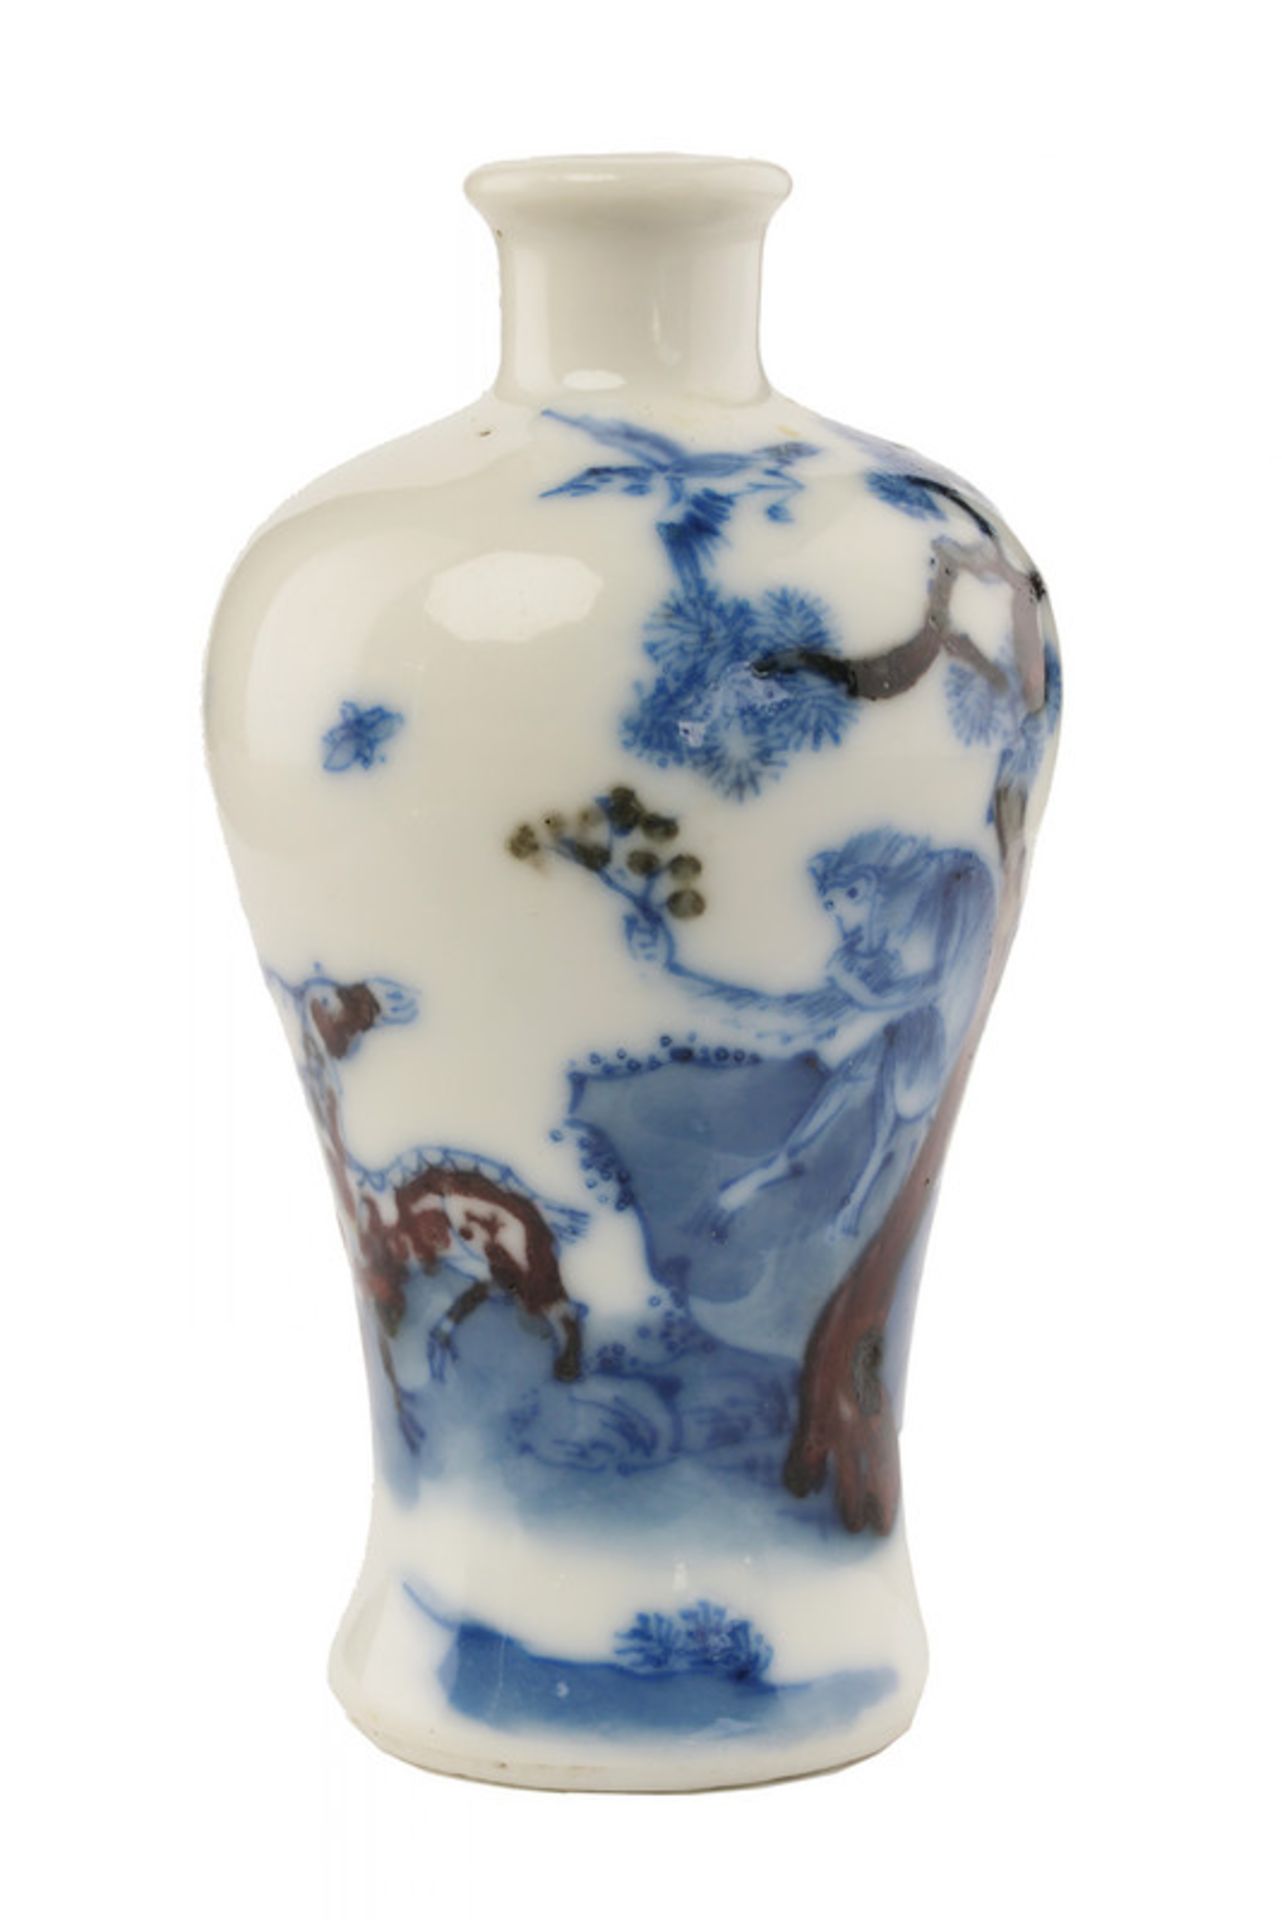 A fine Meping shaped porcelain snuff bottle dating: 19th Century provenance: China Finely painted in